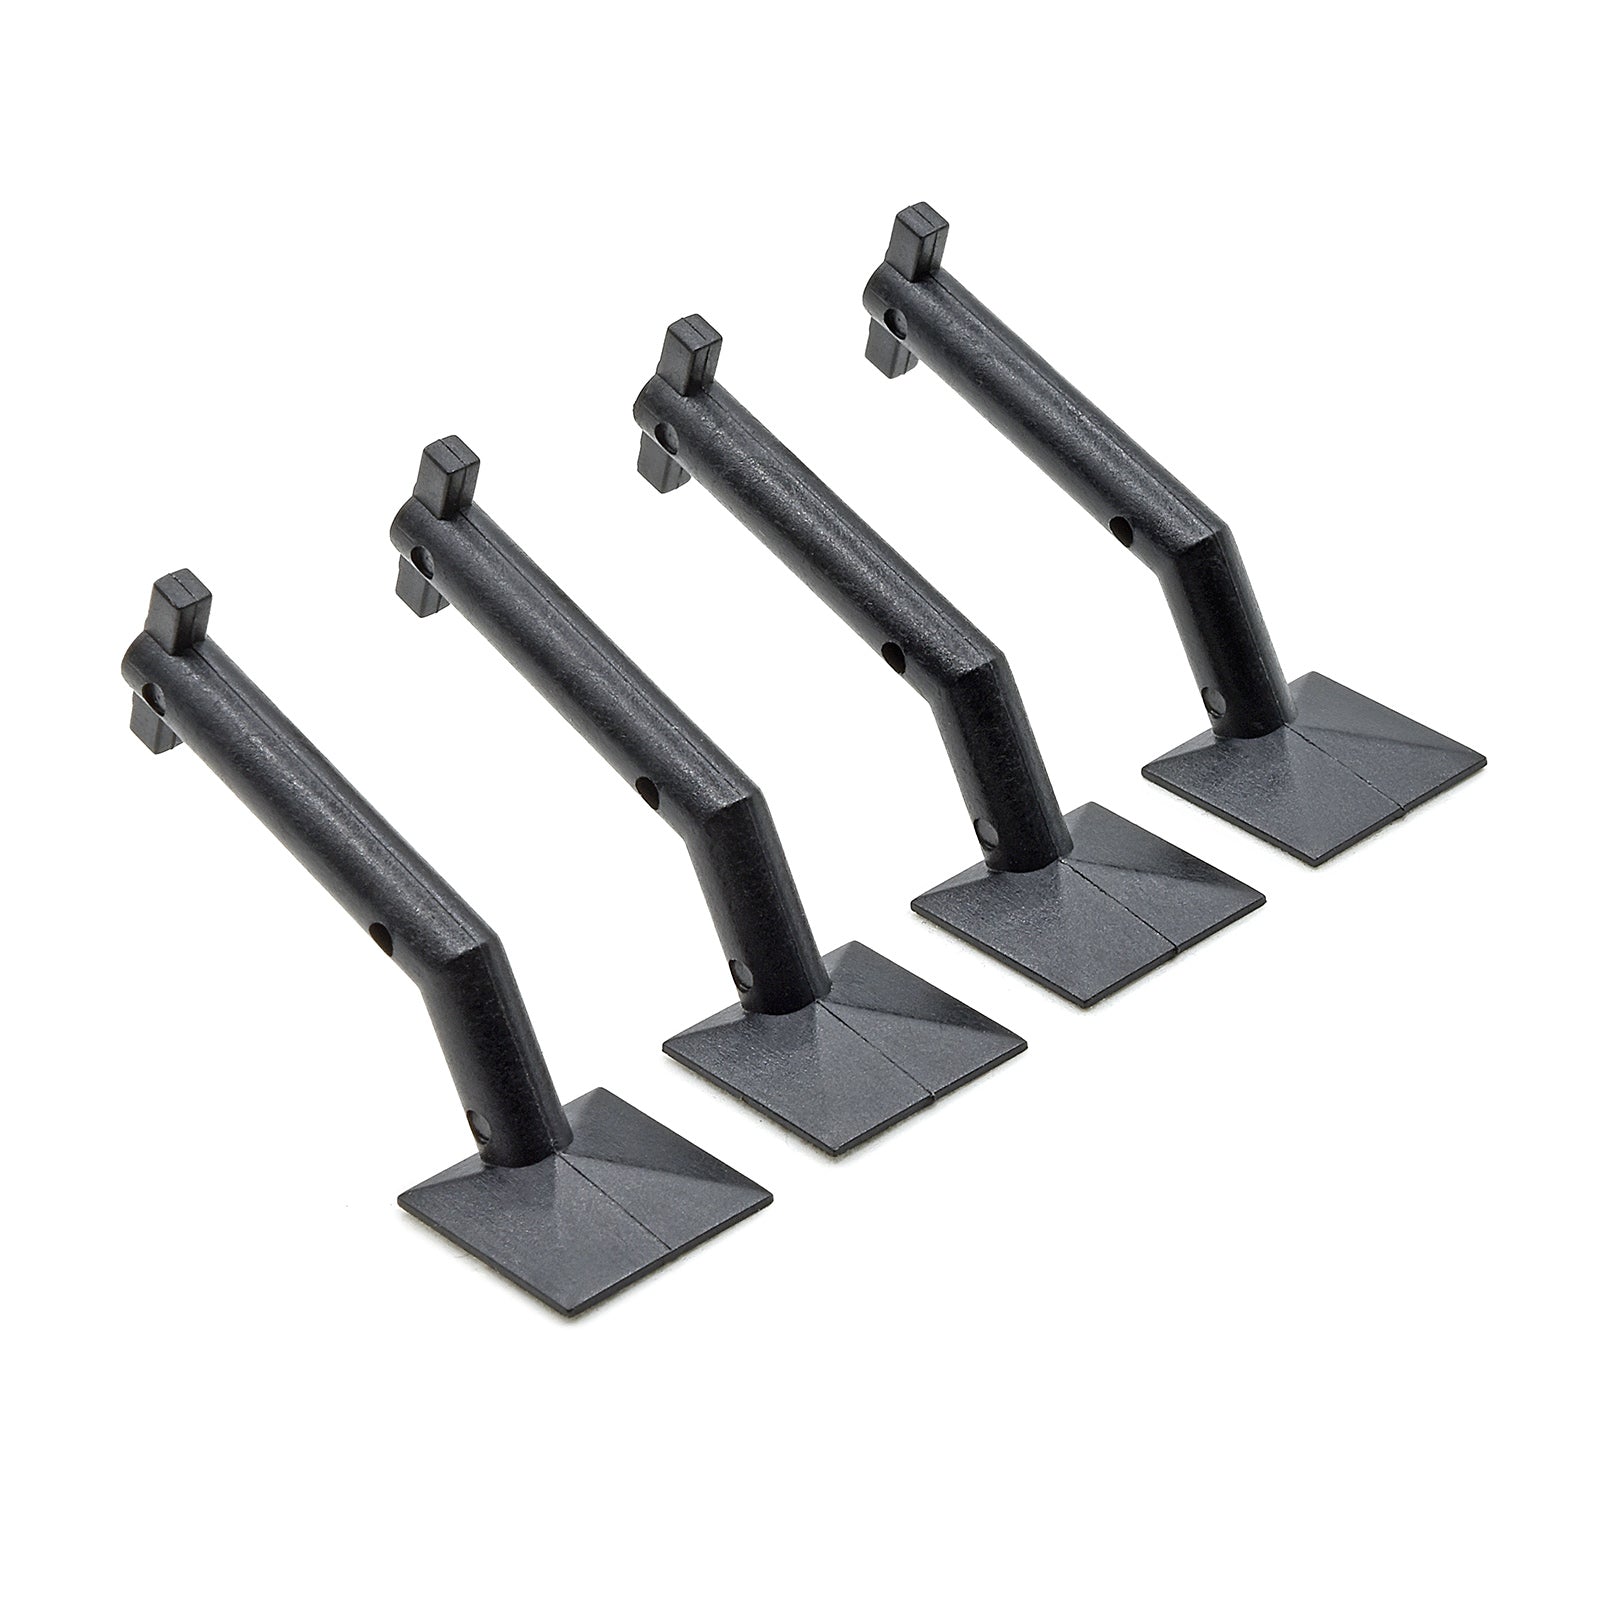 Replacement Square Heads, 4 Pieces